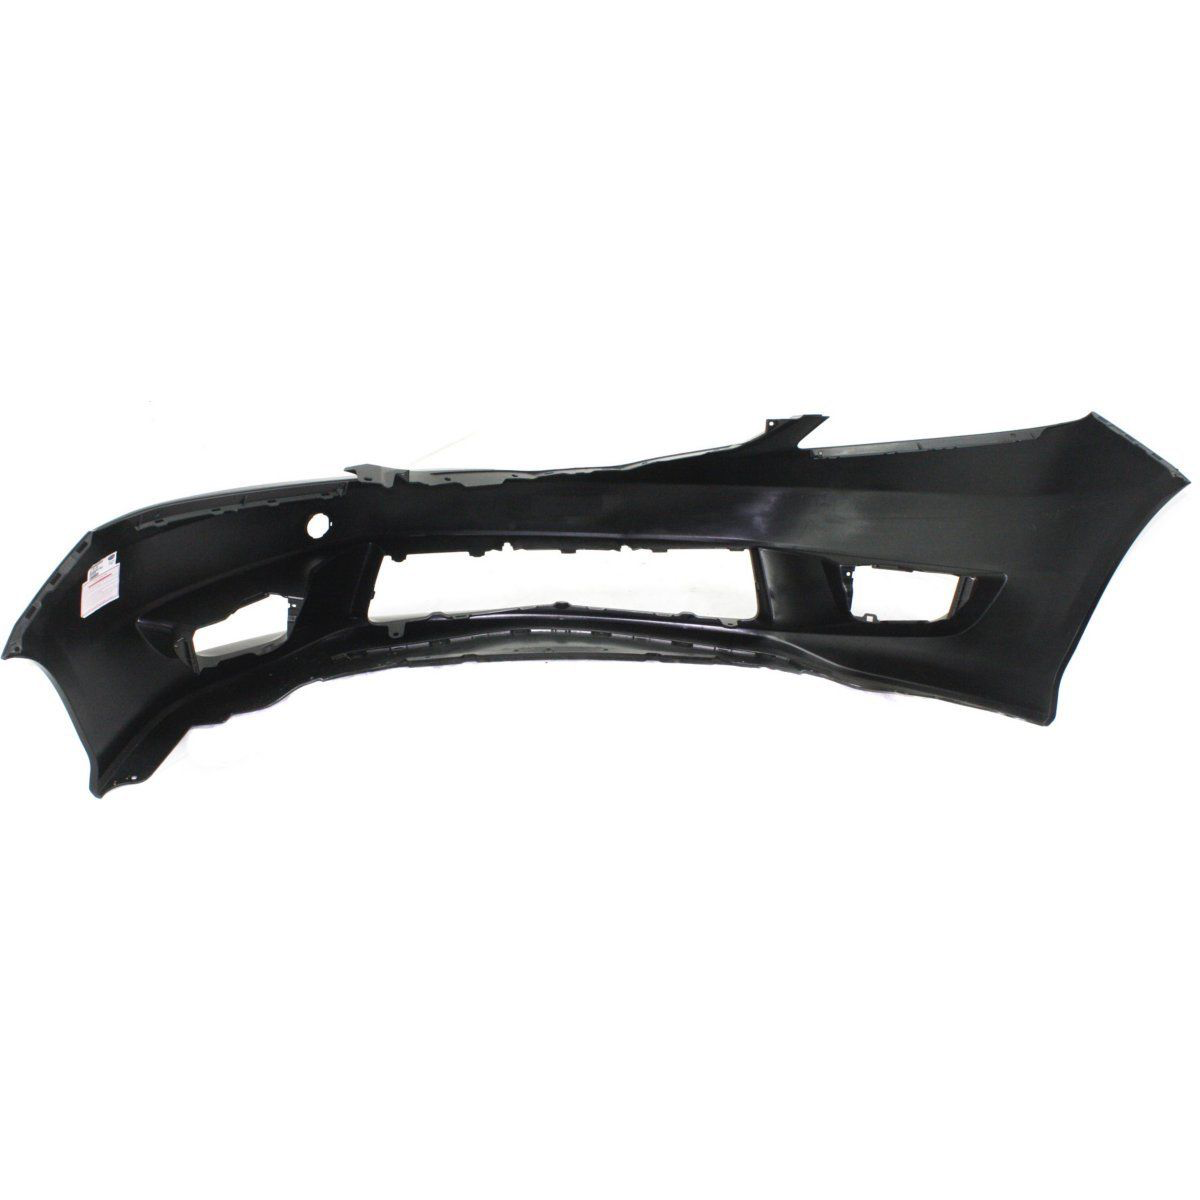 2009-2011 HONDA FIT Front Bumper Cover SPORT Painted to Match